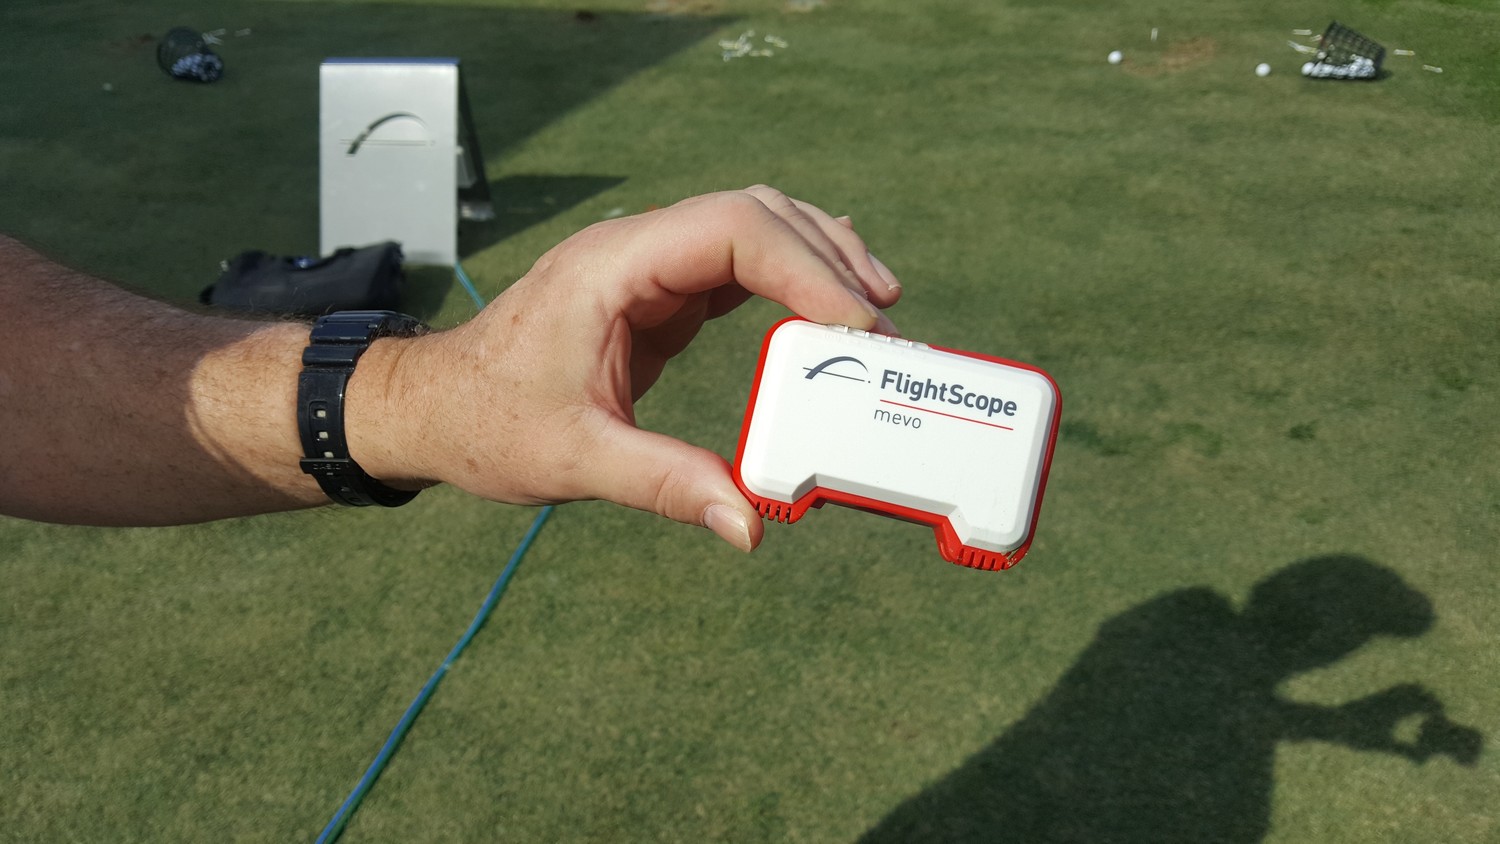 mevo by FlightScope is a new, modestly priced ball flight tracker that provides information on shots.